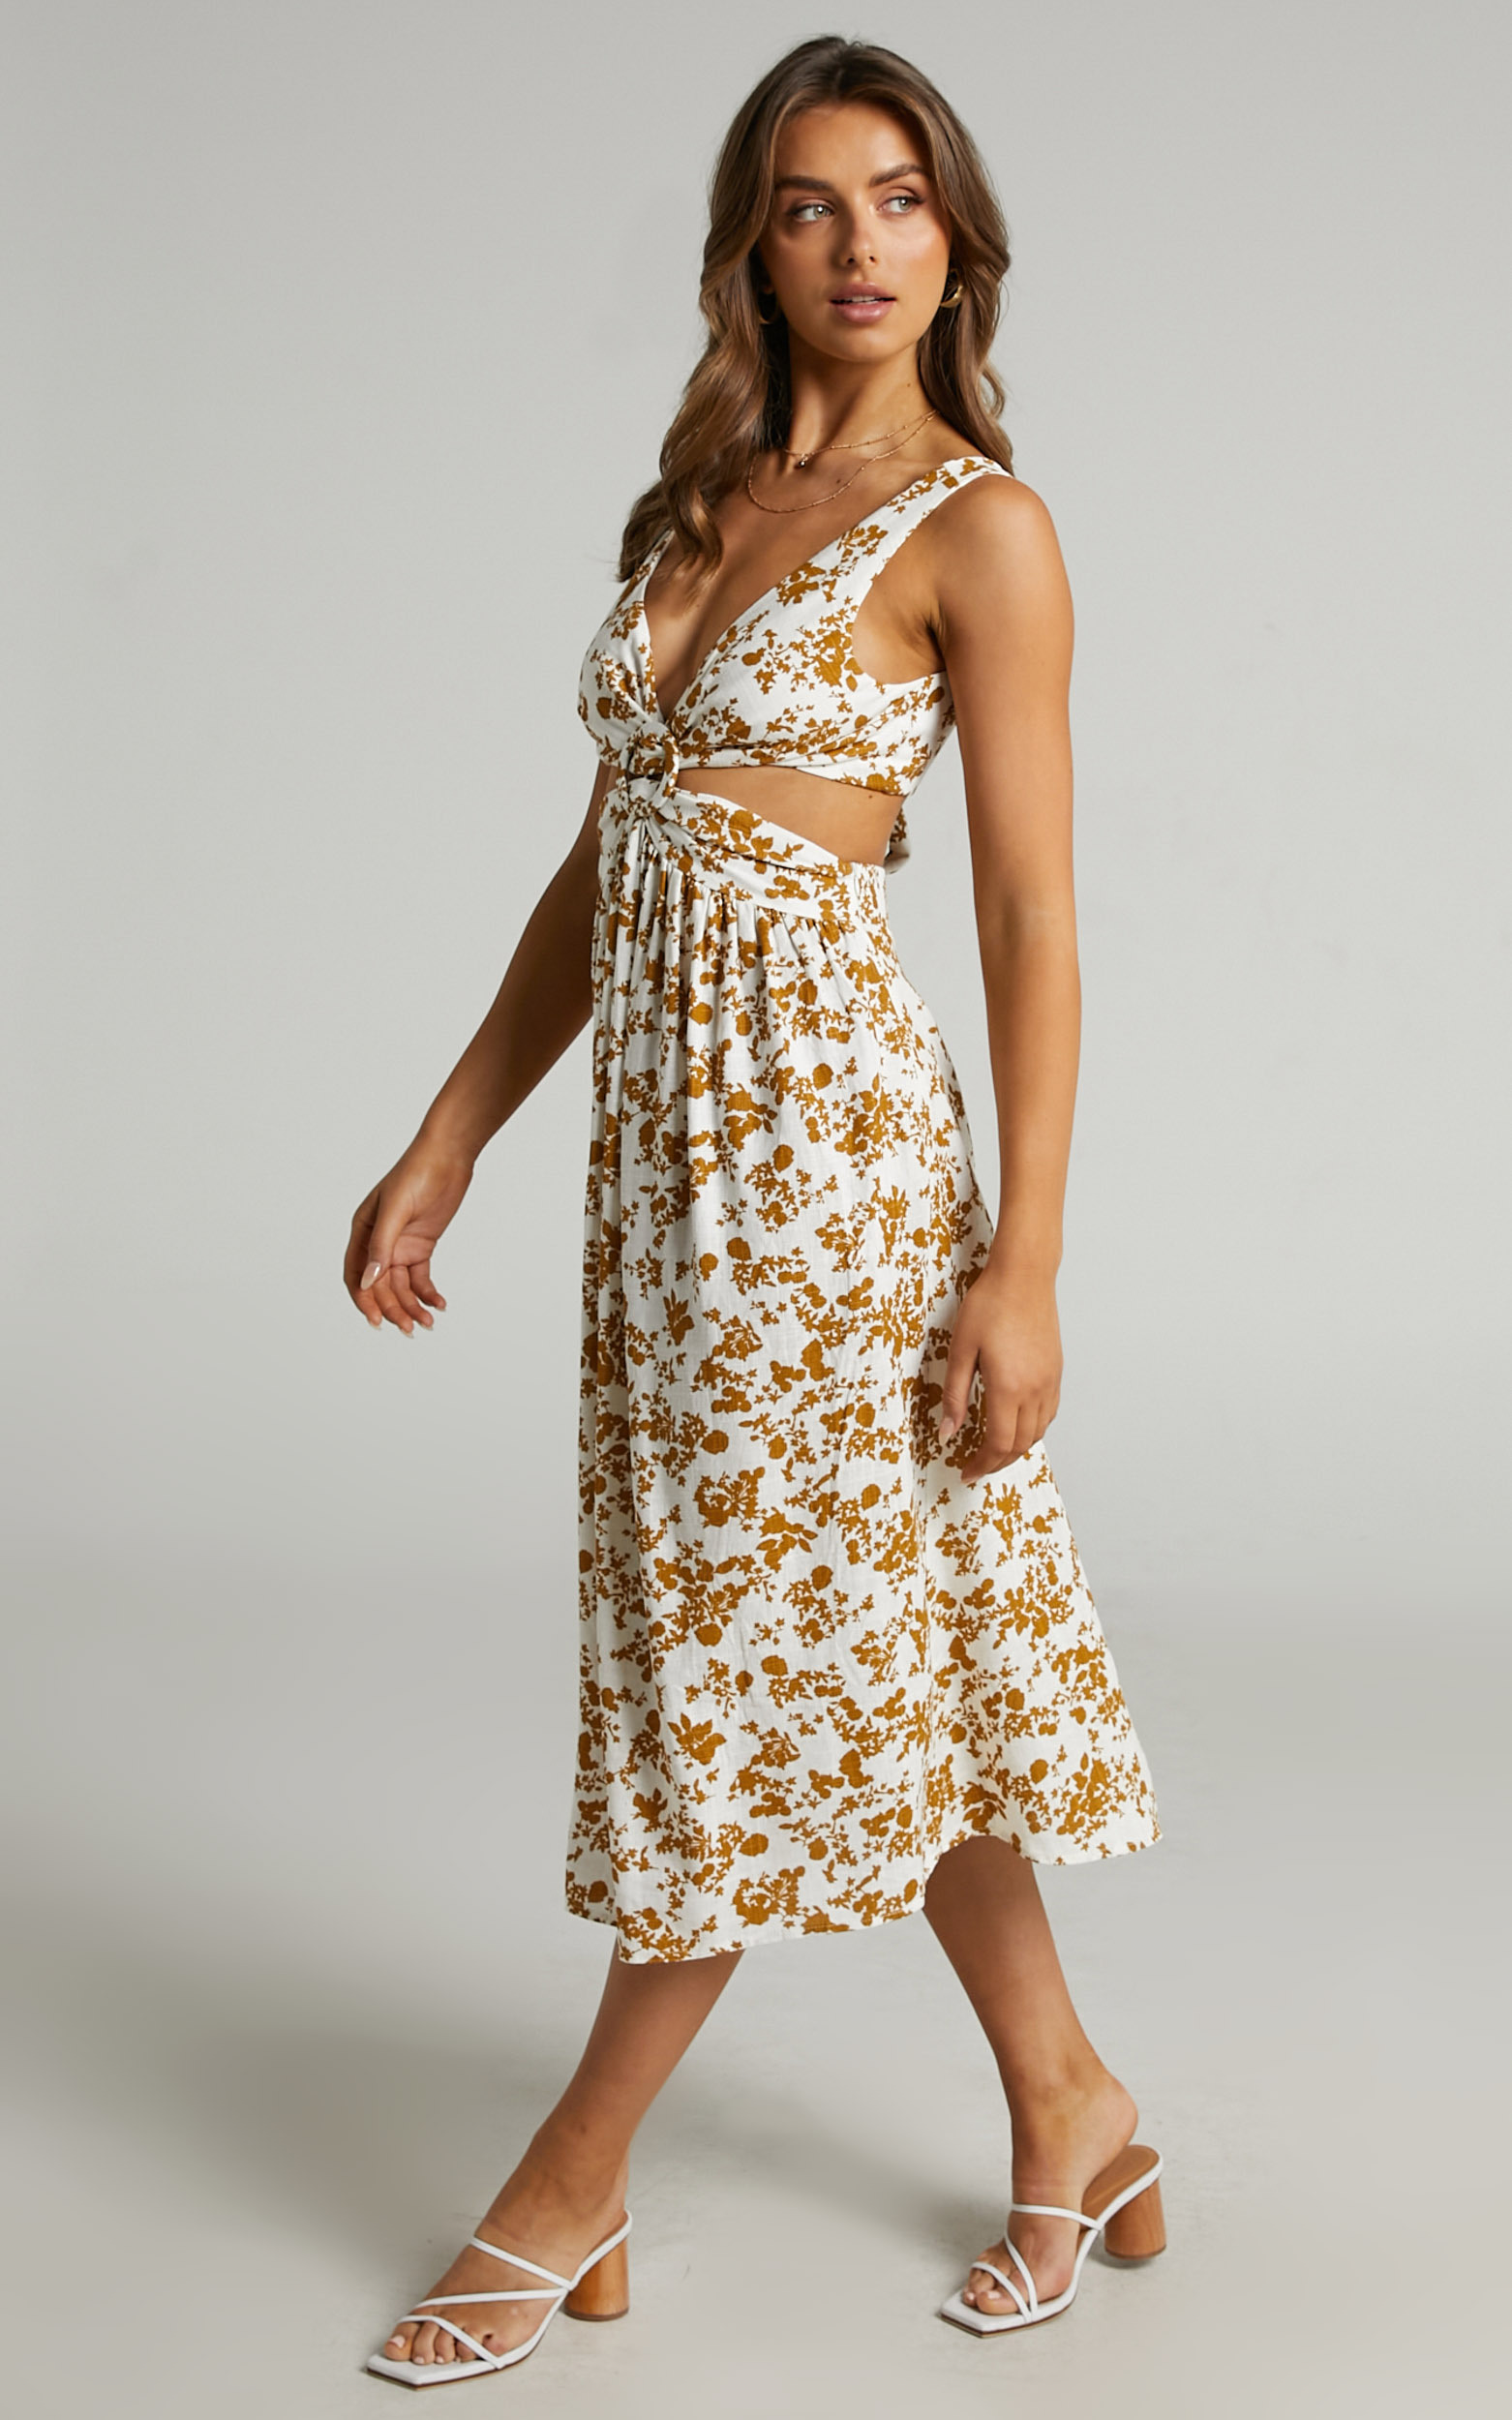 Timothea Sleeveless Ring Front Midi Dress in Mustard Floral - 06, YEL1, hi-res image number null